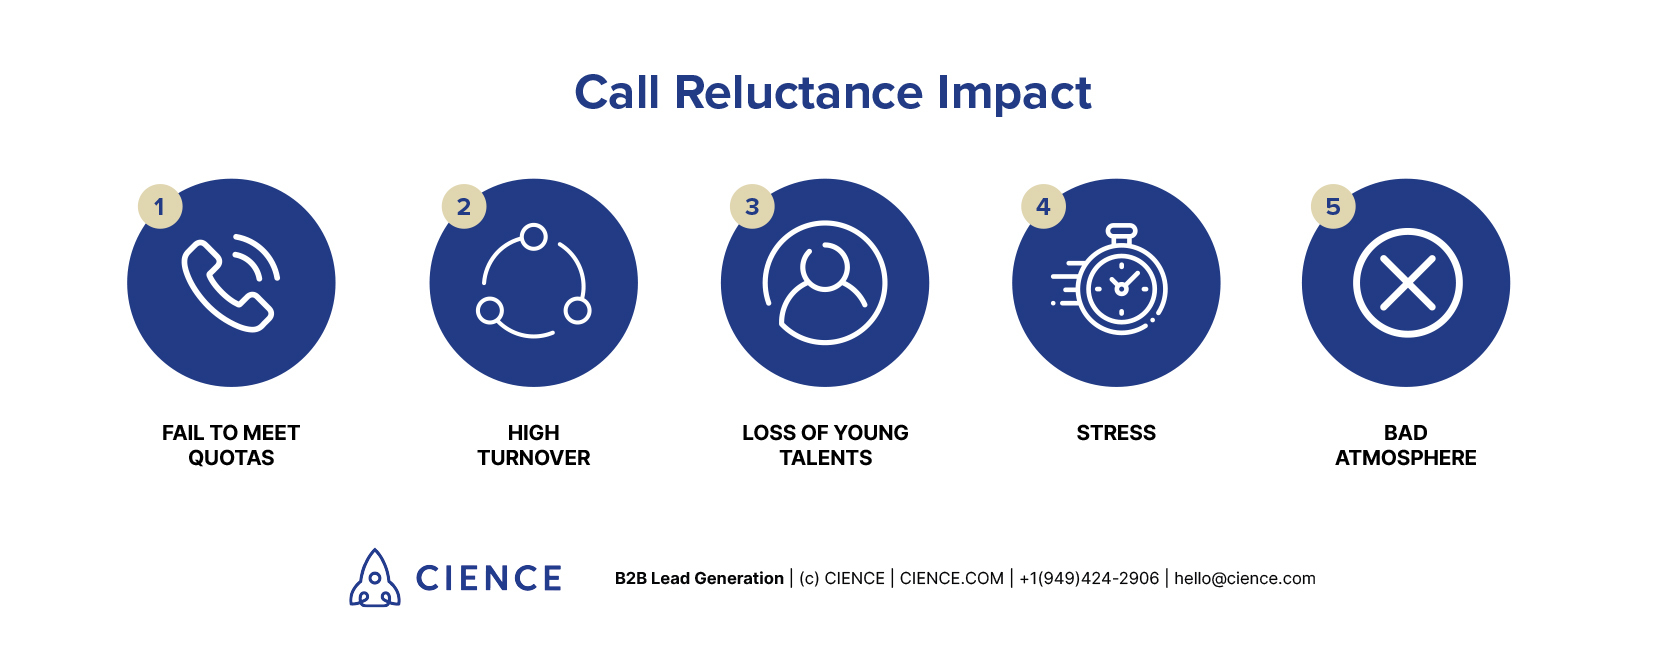 Results and impacts of Call Reluctance